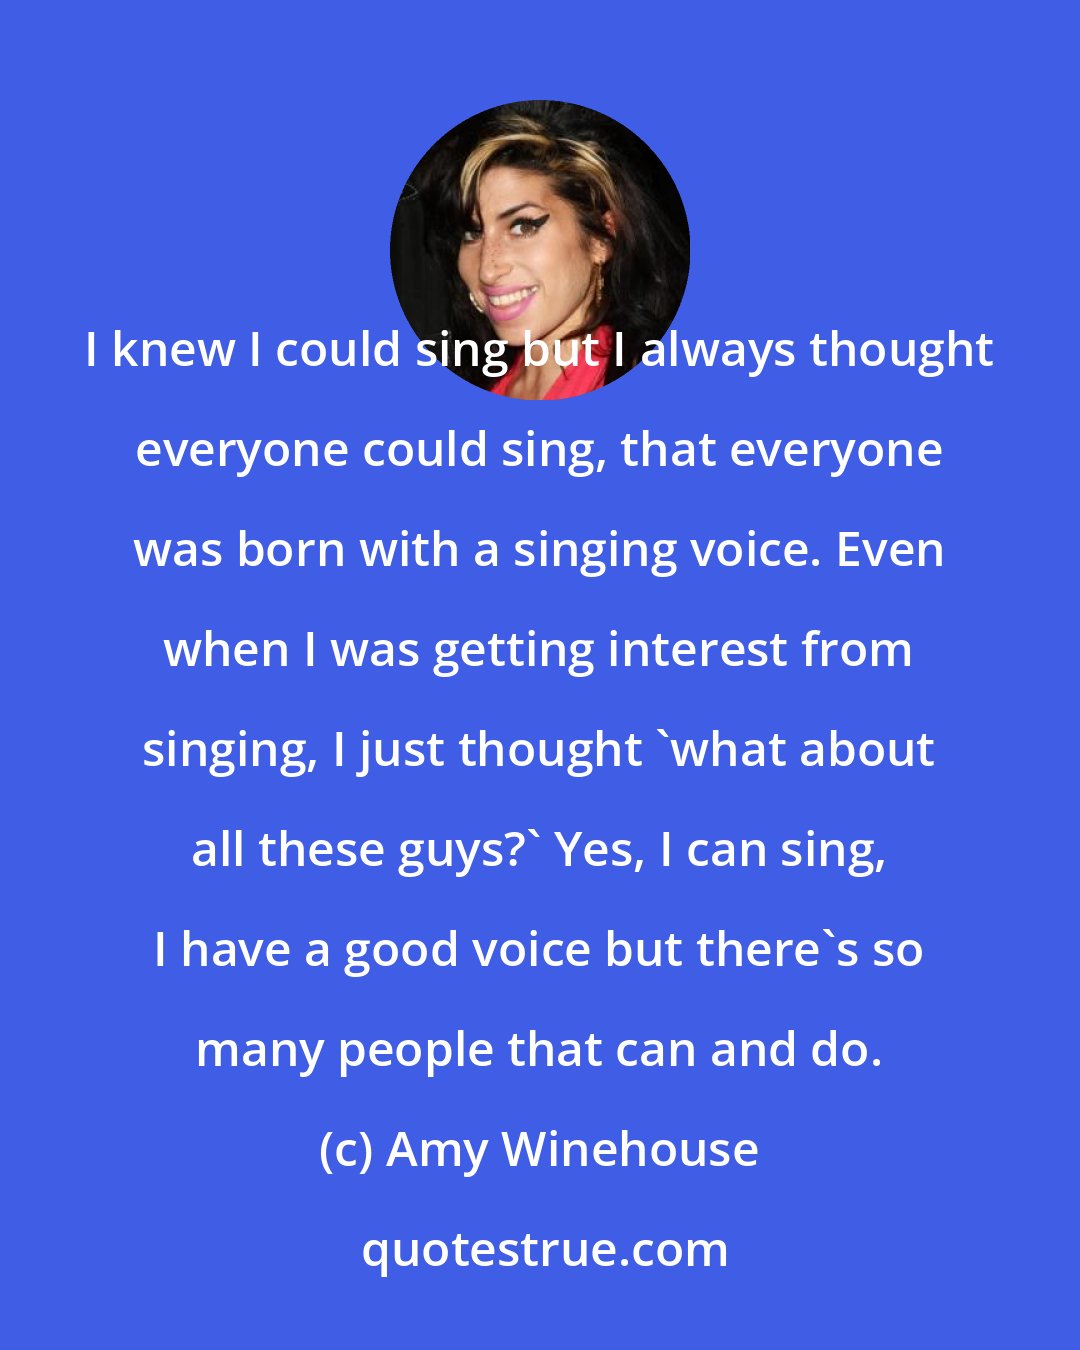 Amy Winehouse: I knew I could sing but I always thought everyone could sing, that everyone was born with a singing voice. Even when I was getting interest from singing, I just thought 'what about all these guys?' Yes, I can sing, I have a good voice but there's so many people that can and do.